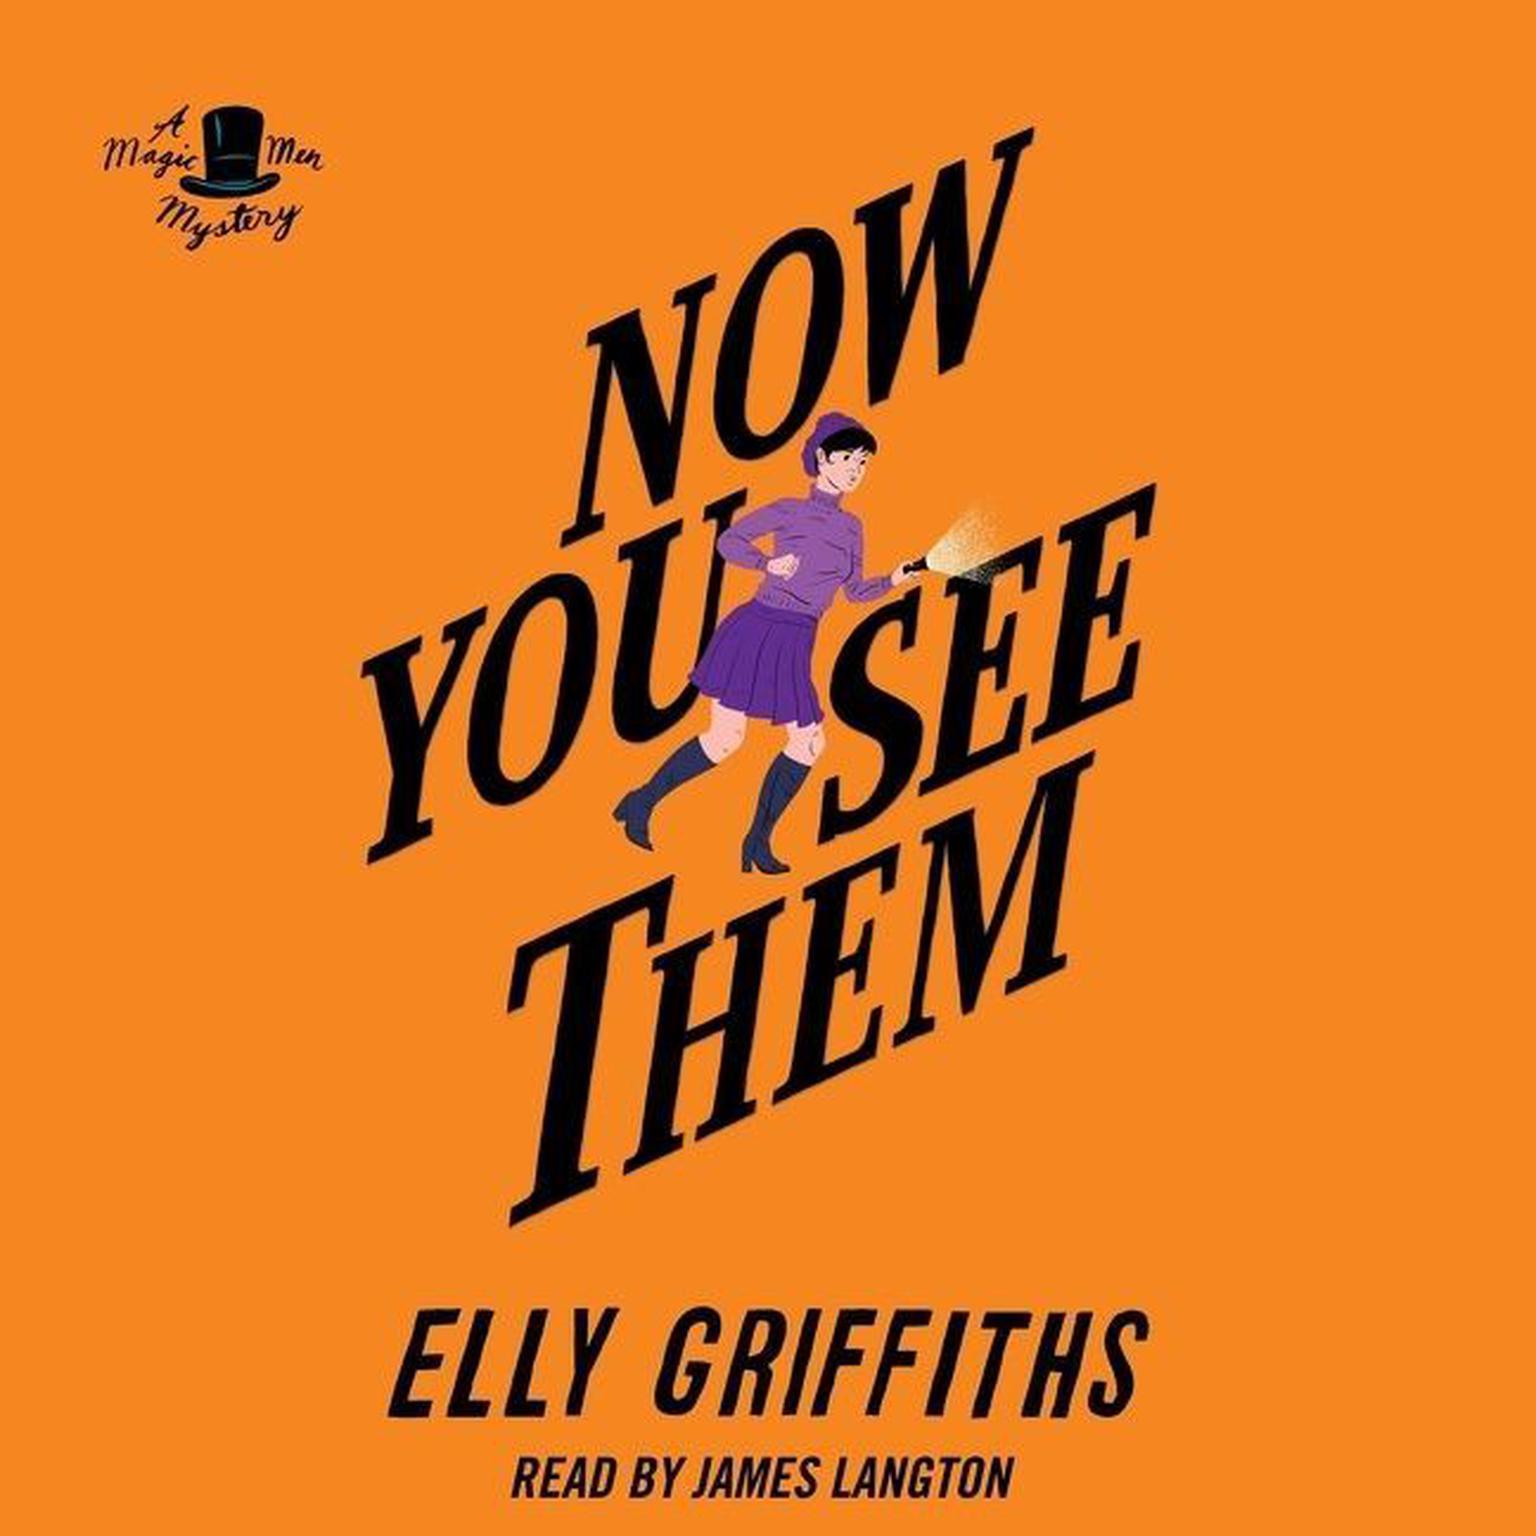 Now You See Them Audiobook, by Elly Griffiths